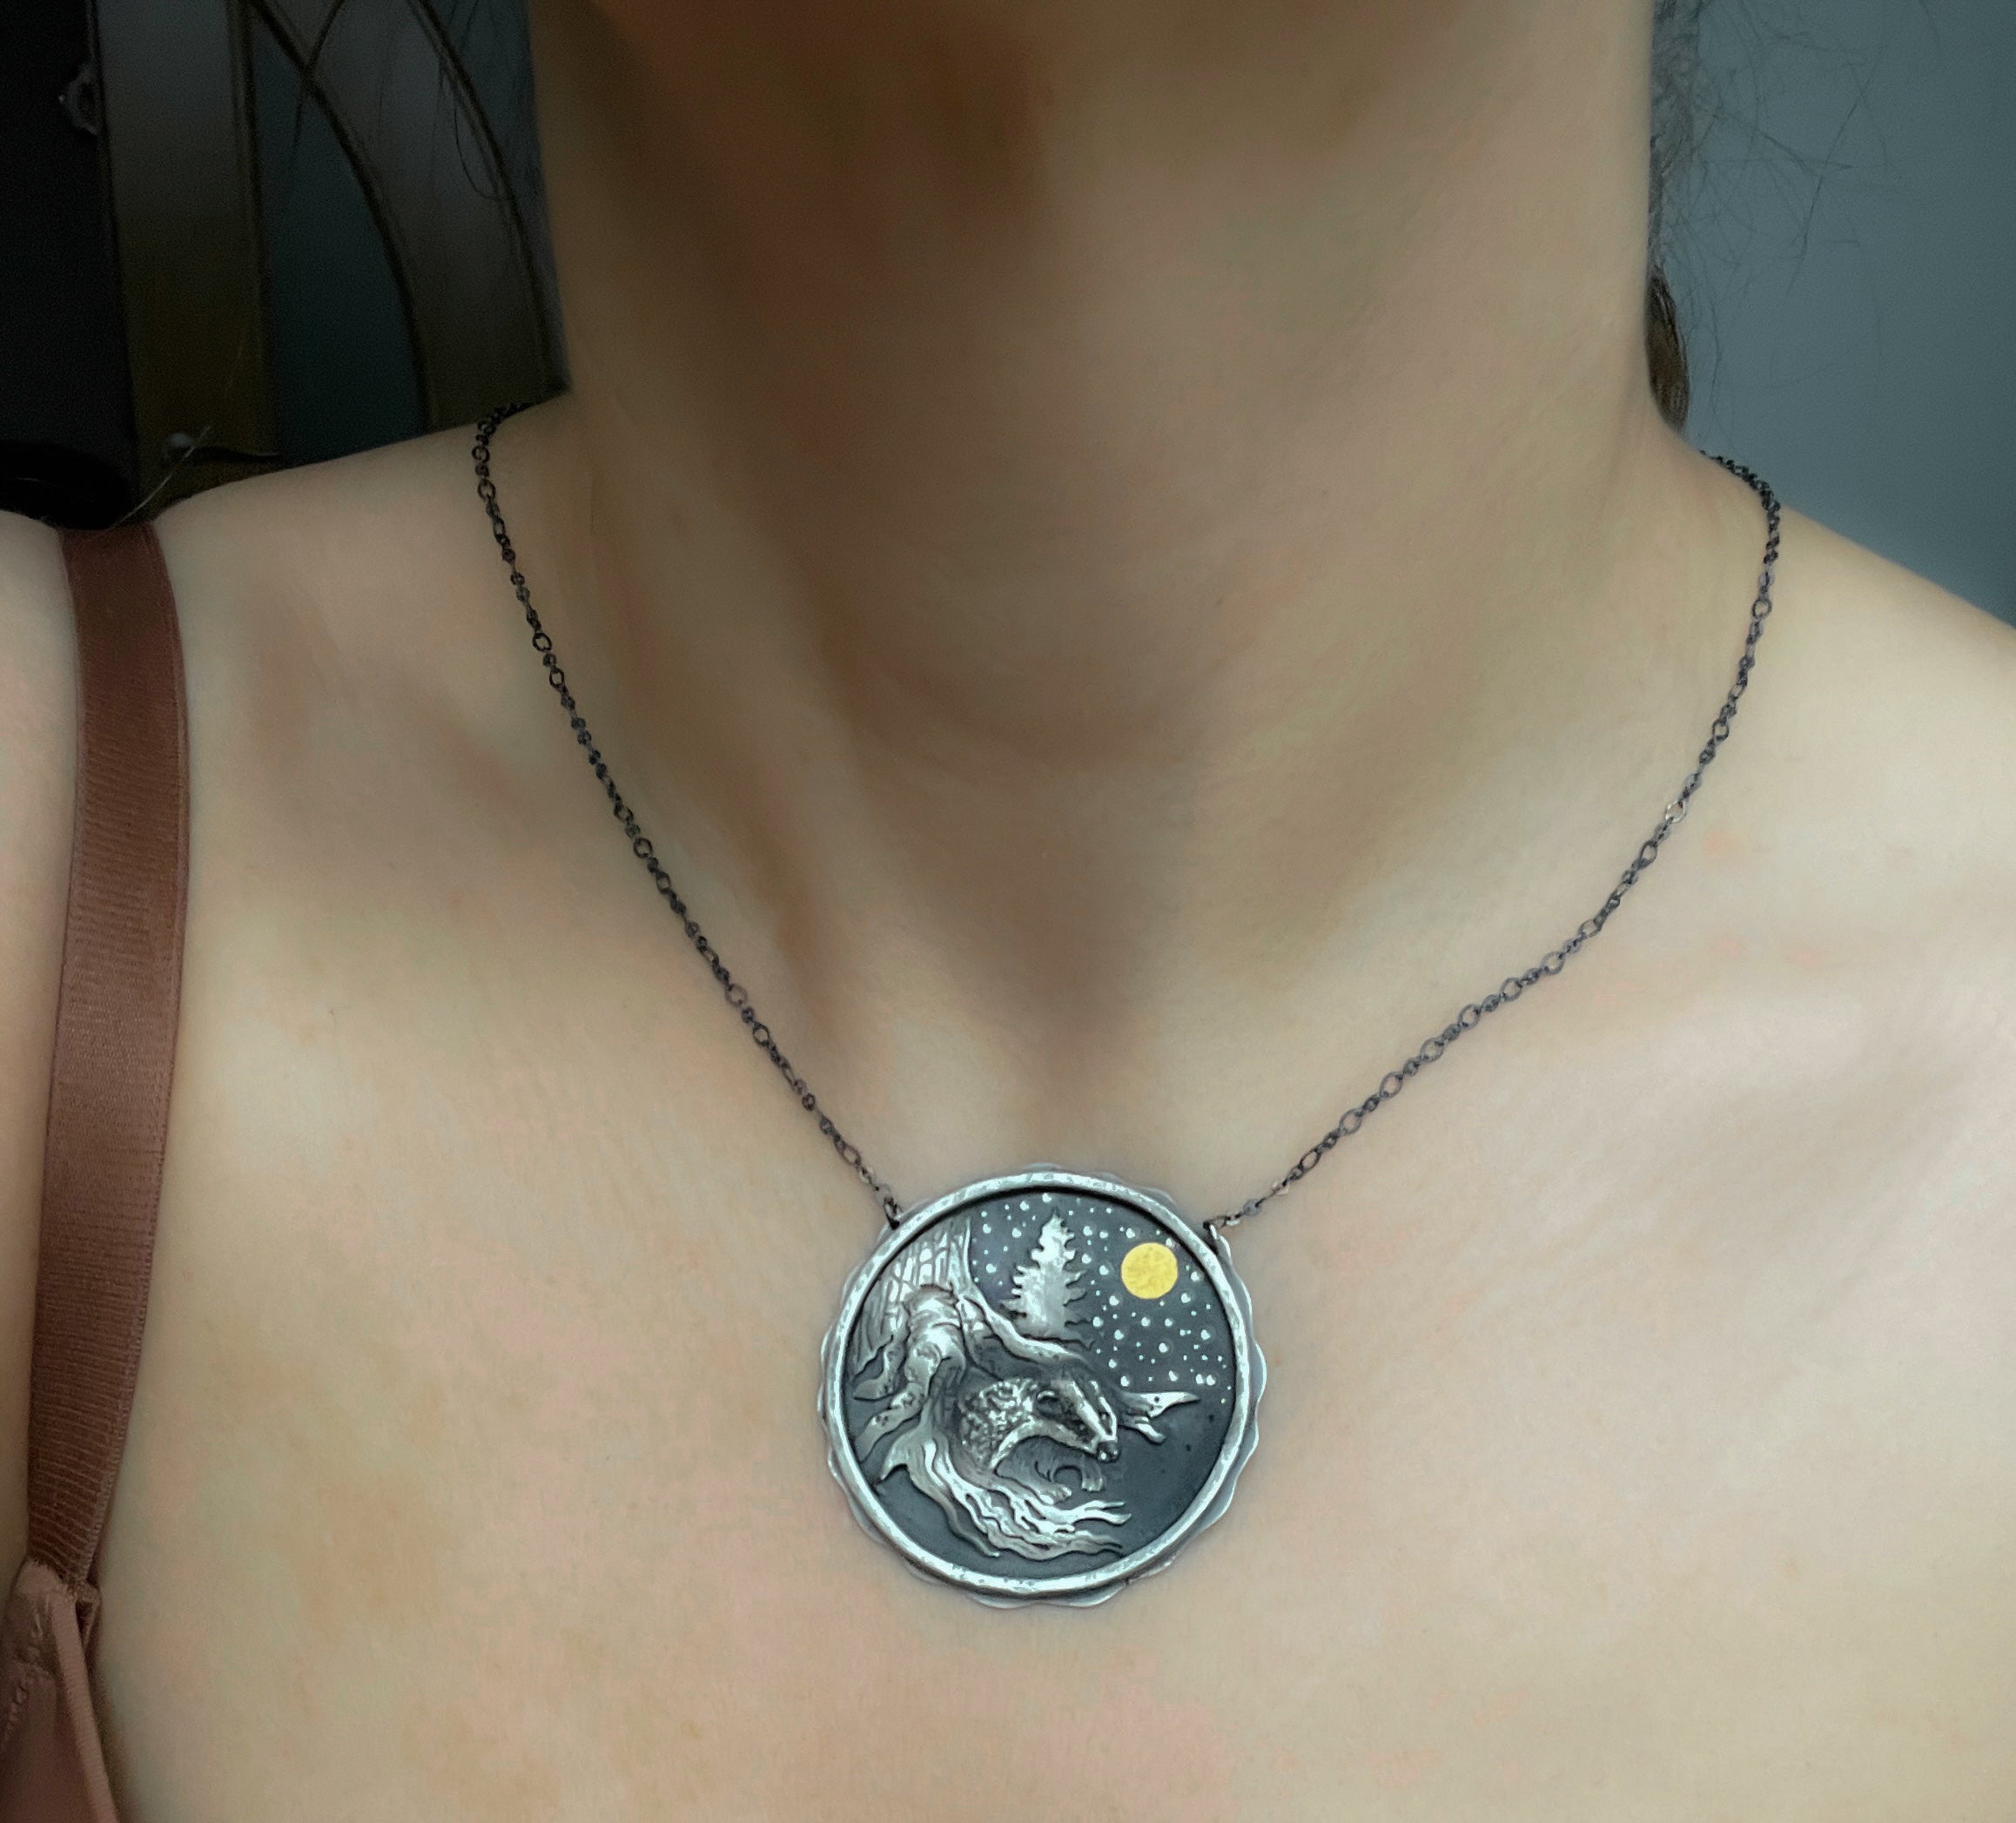 The Badger & Moon Necklace